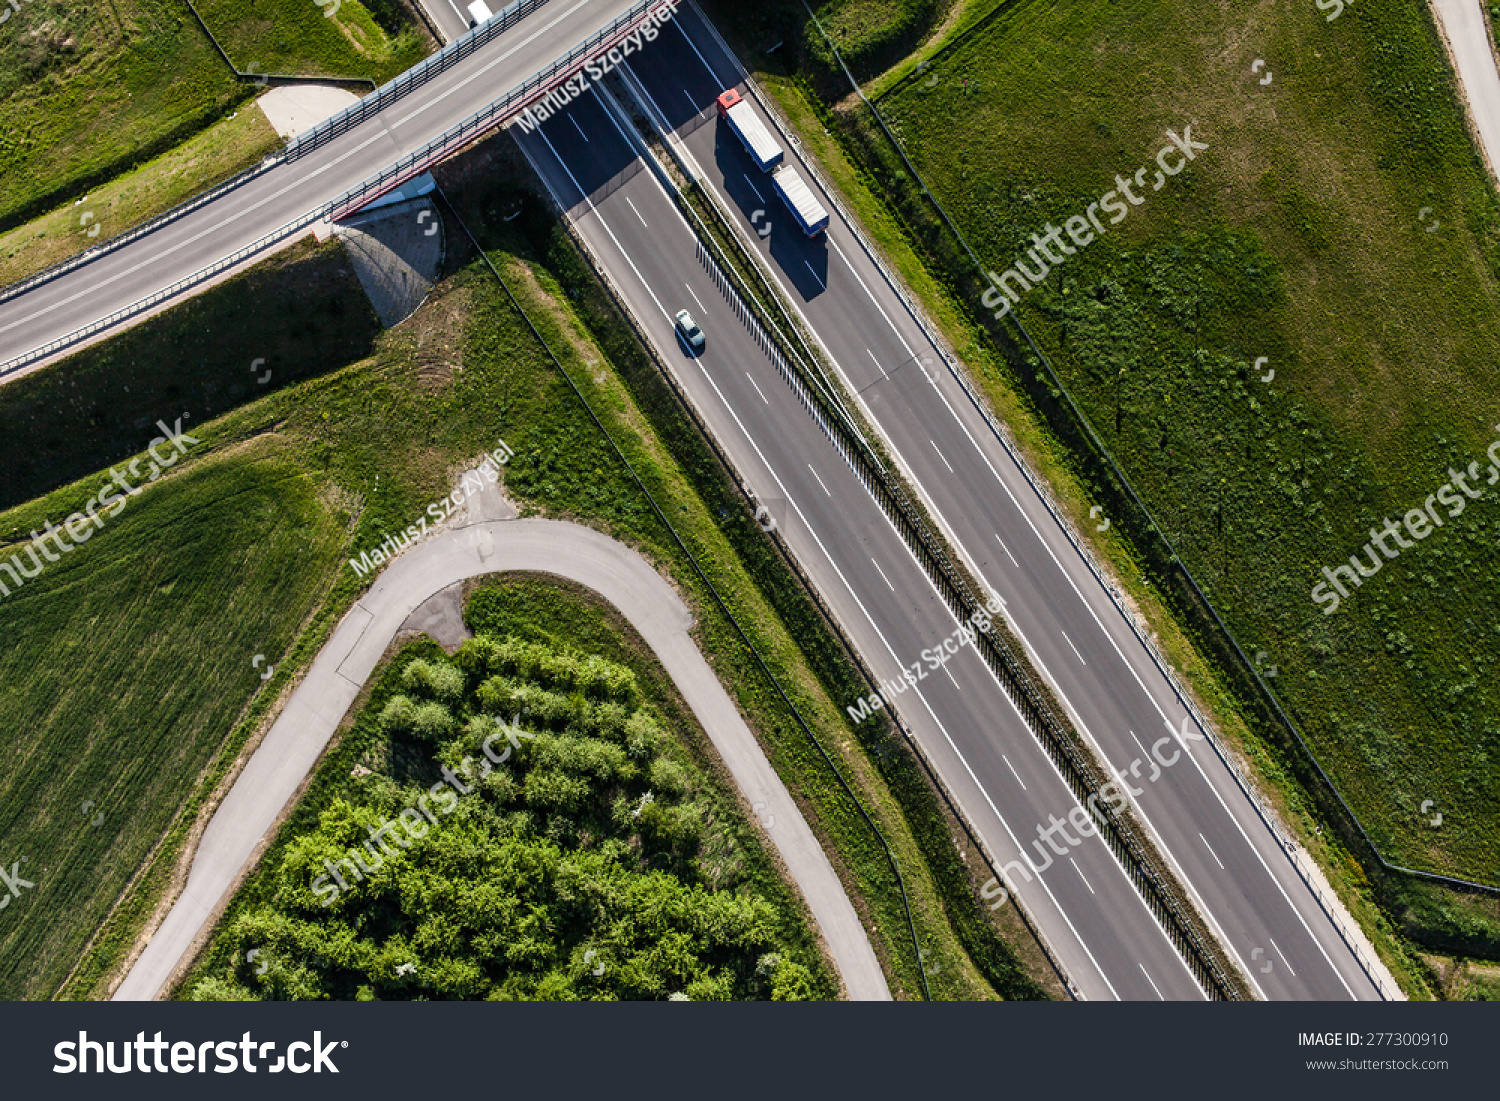 Aerial View Of Highway In Poland Stock Photo 277300910 : Shutterstock